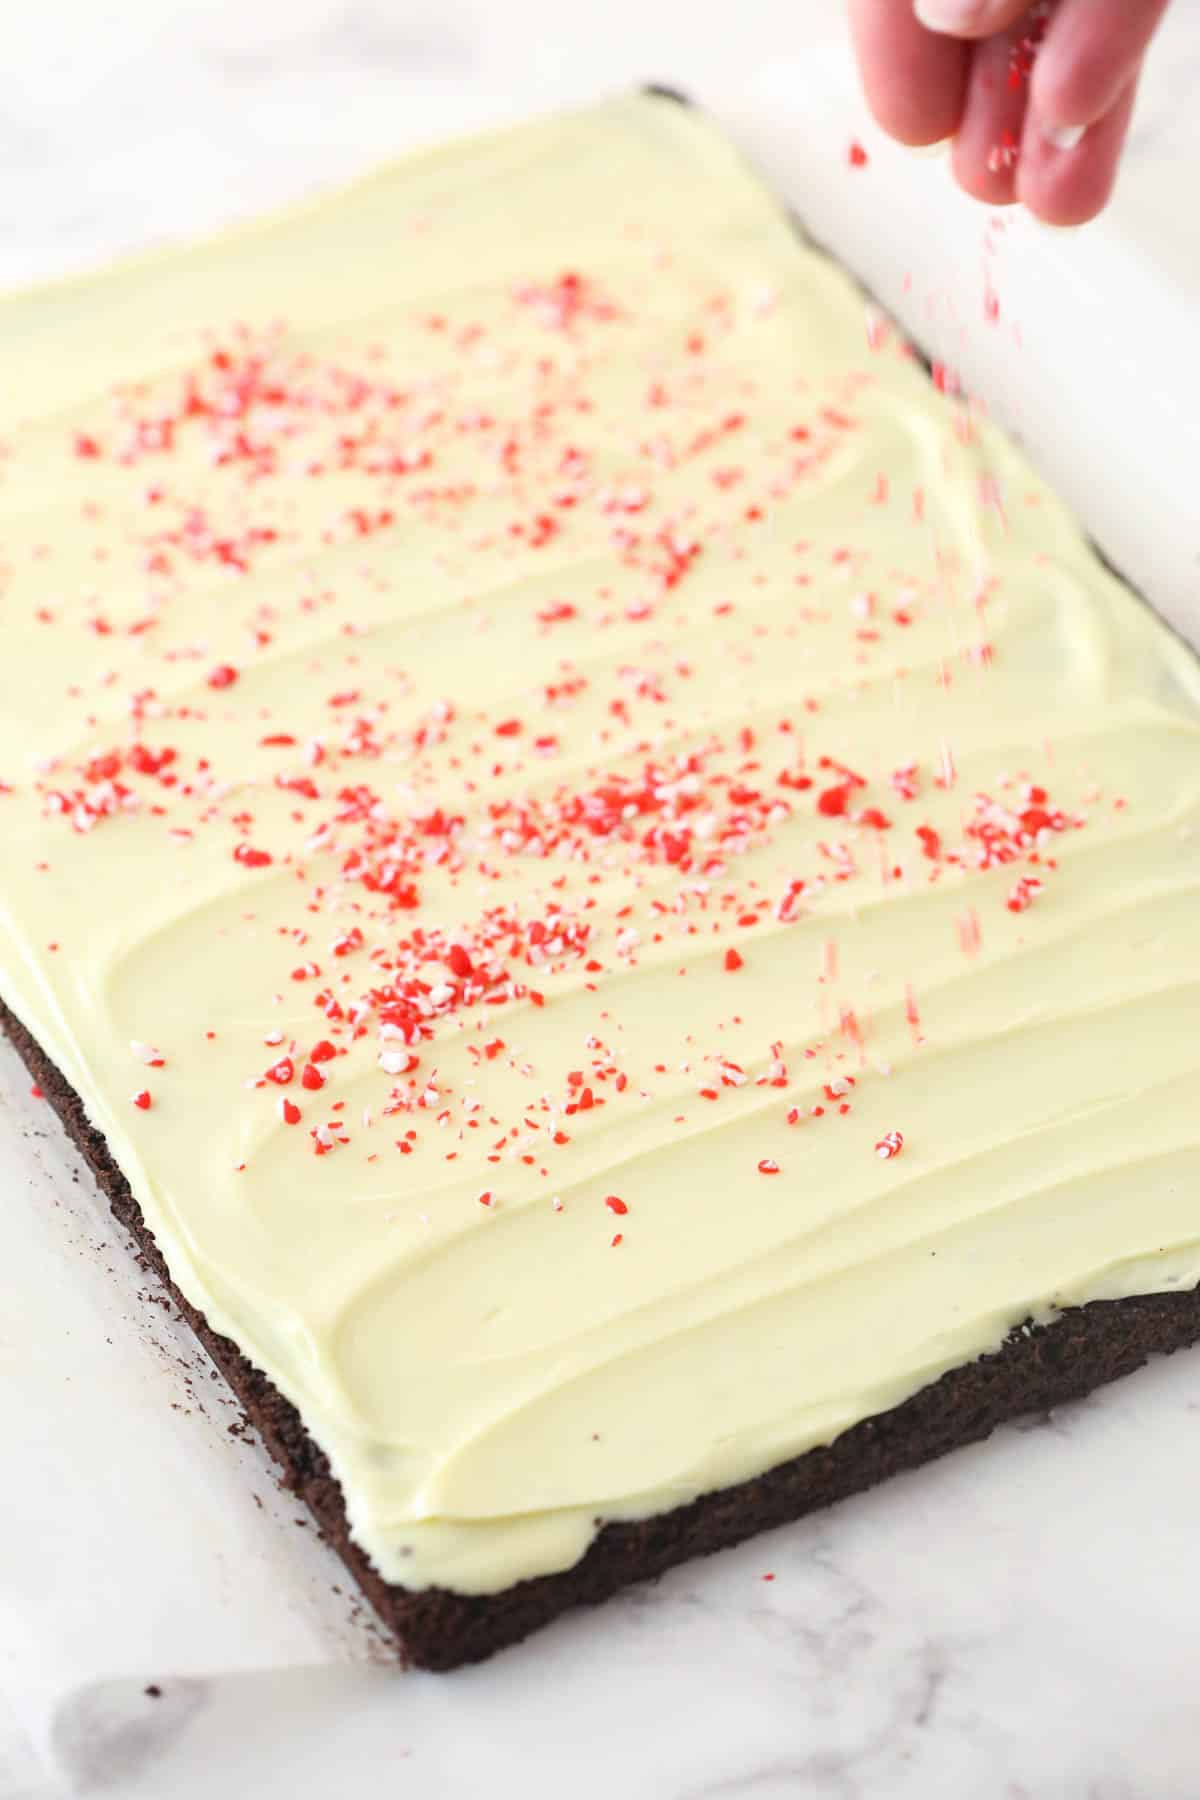 Sprinkling crushed candy canes over the white chocolate layer